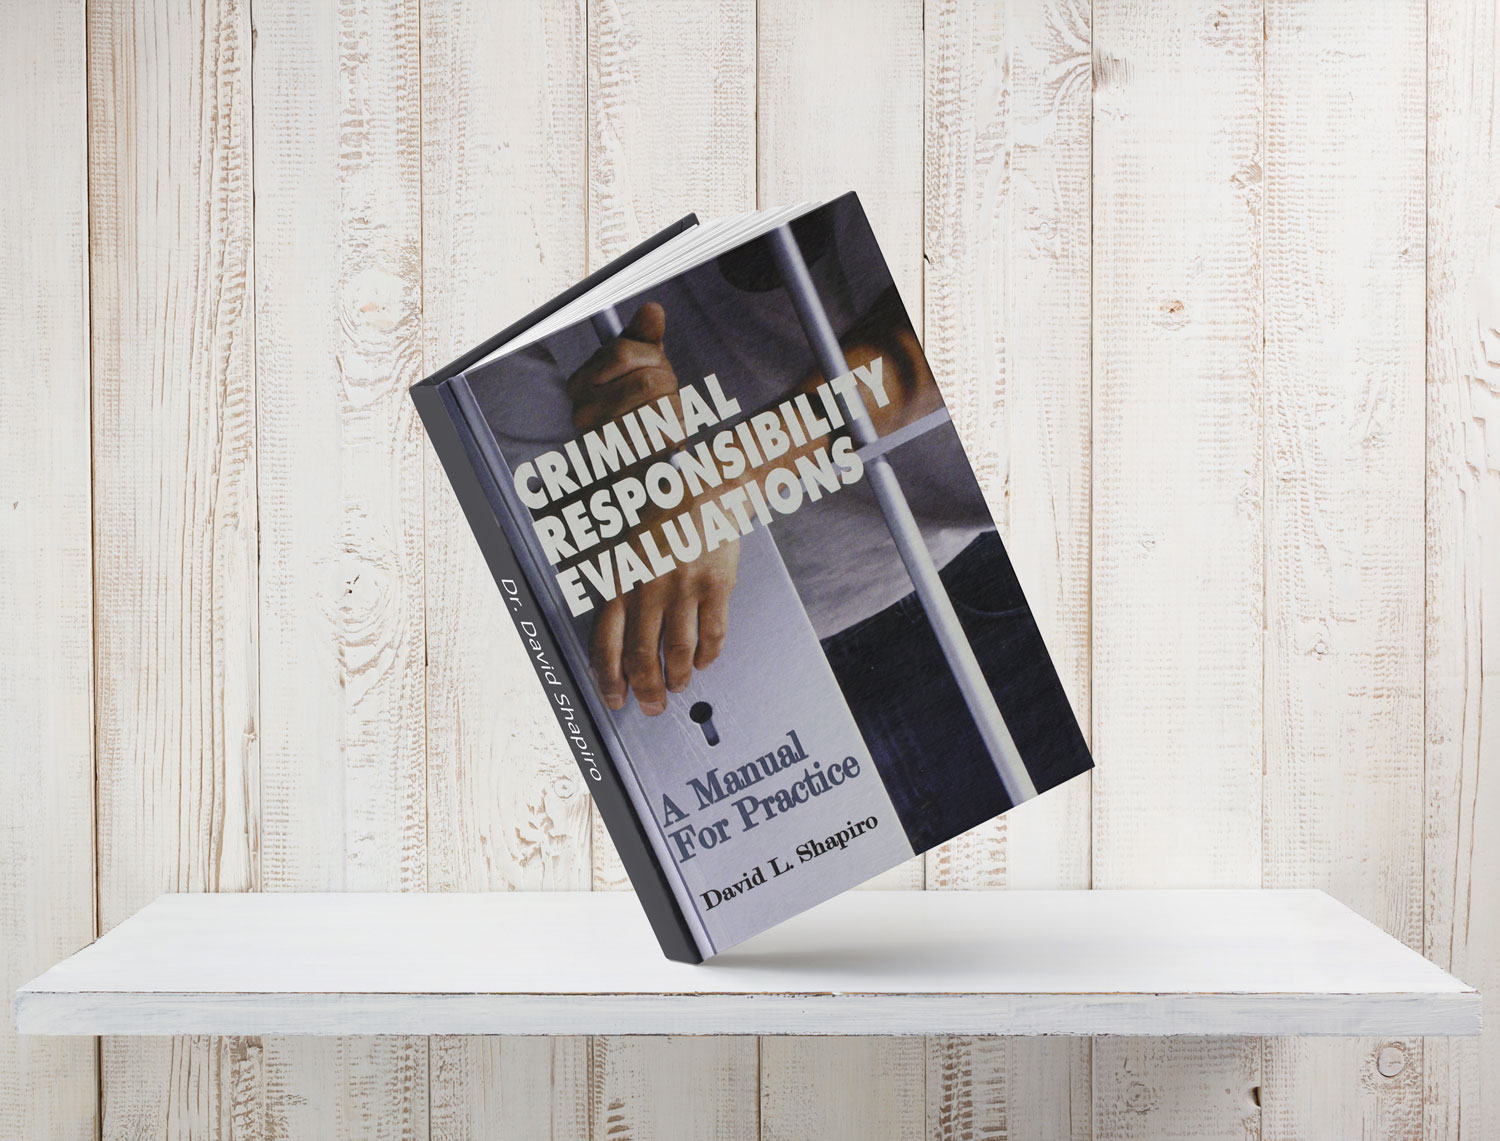 Criminal Responsibility Evaluations: A Manual for Practice